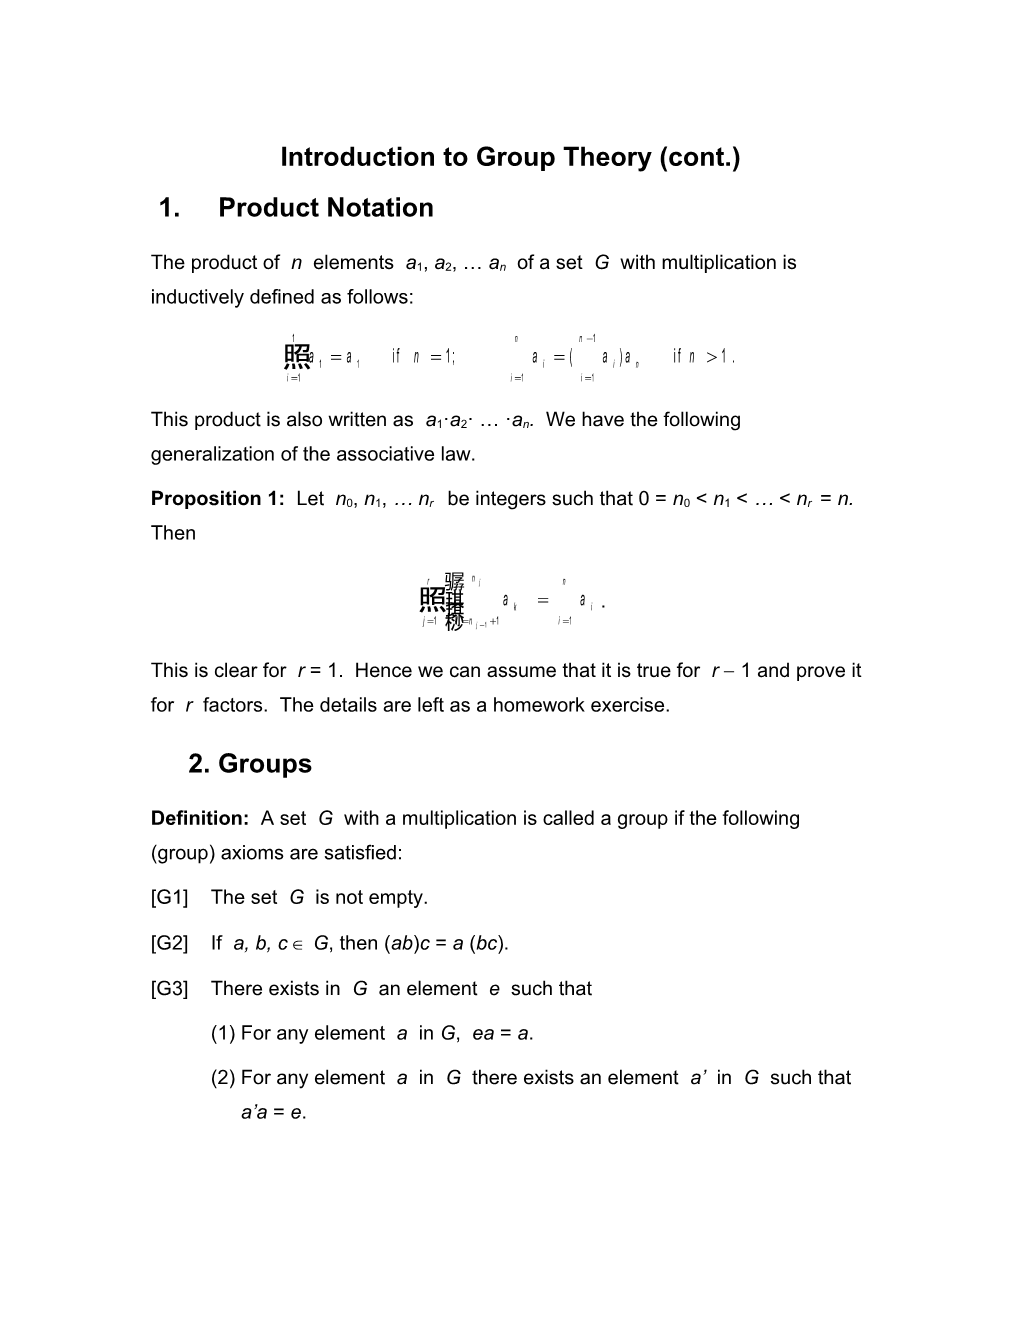 Introduction to Group Theory (Cont